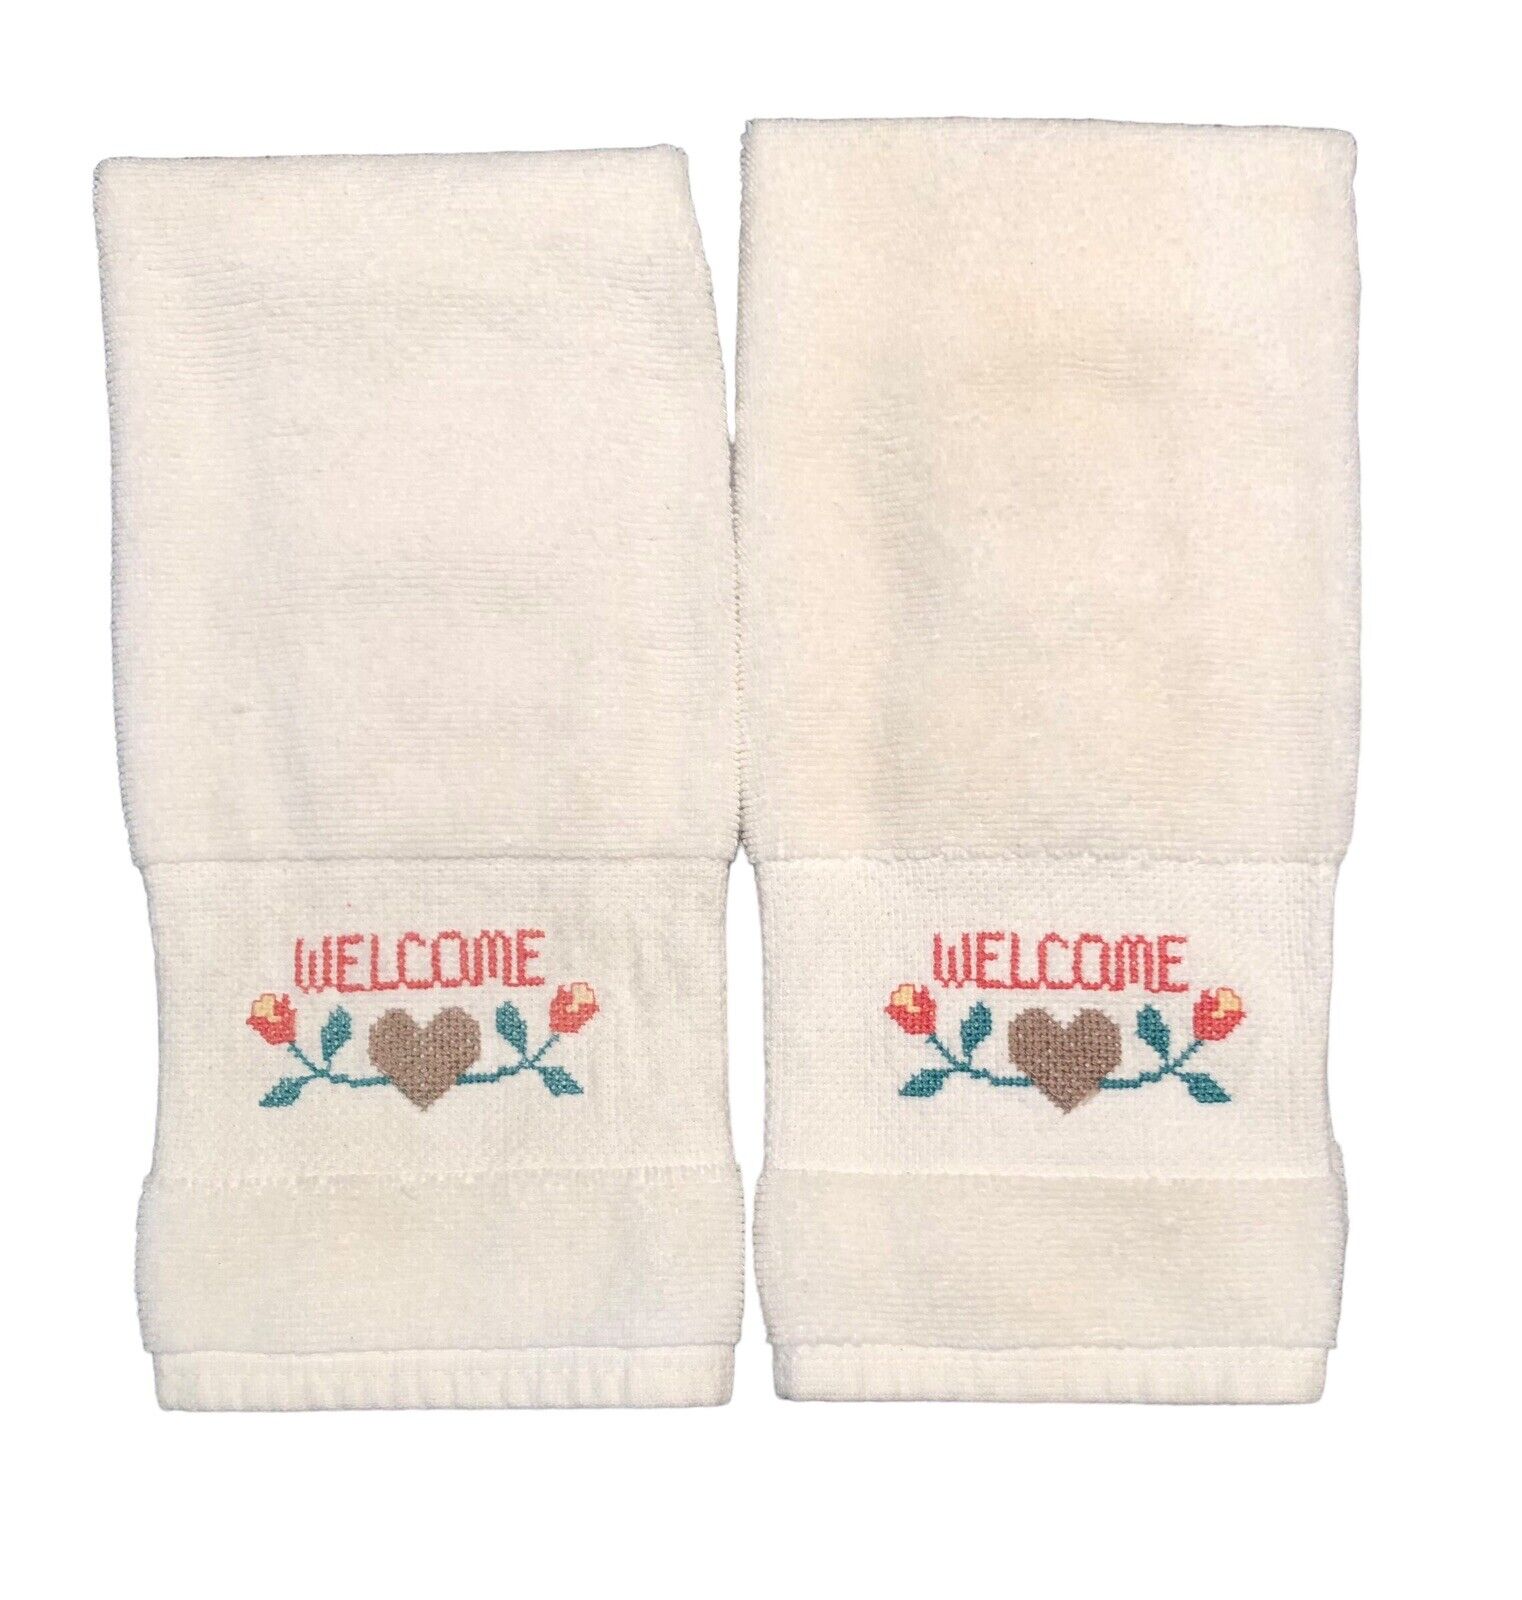 Embroidered Welcome Hand Towel Set Vintage Linens